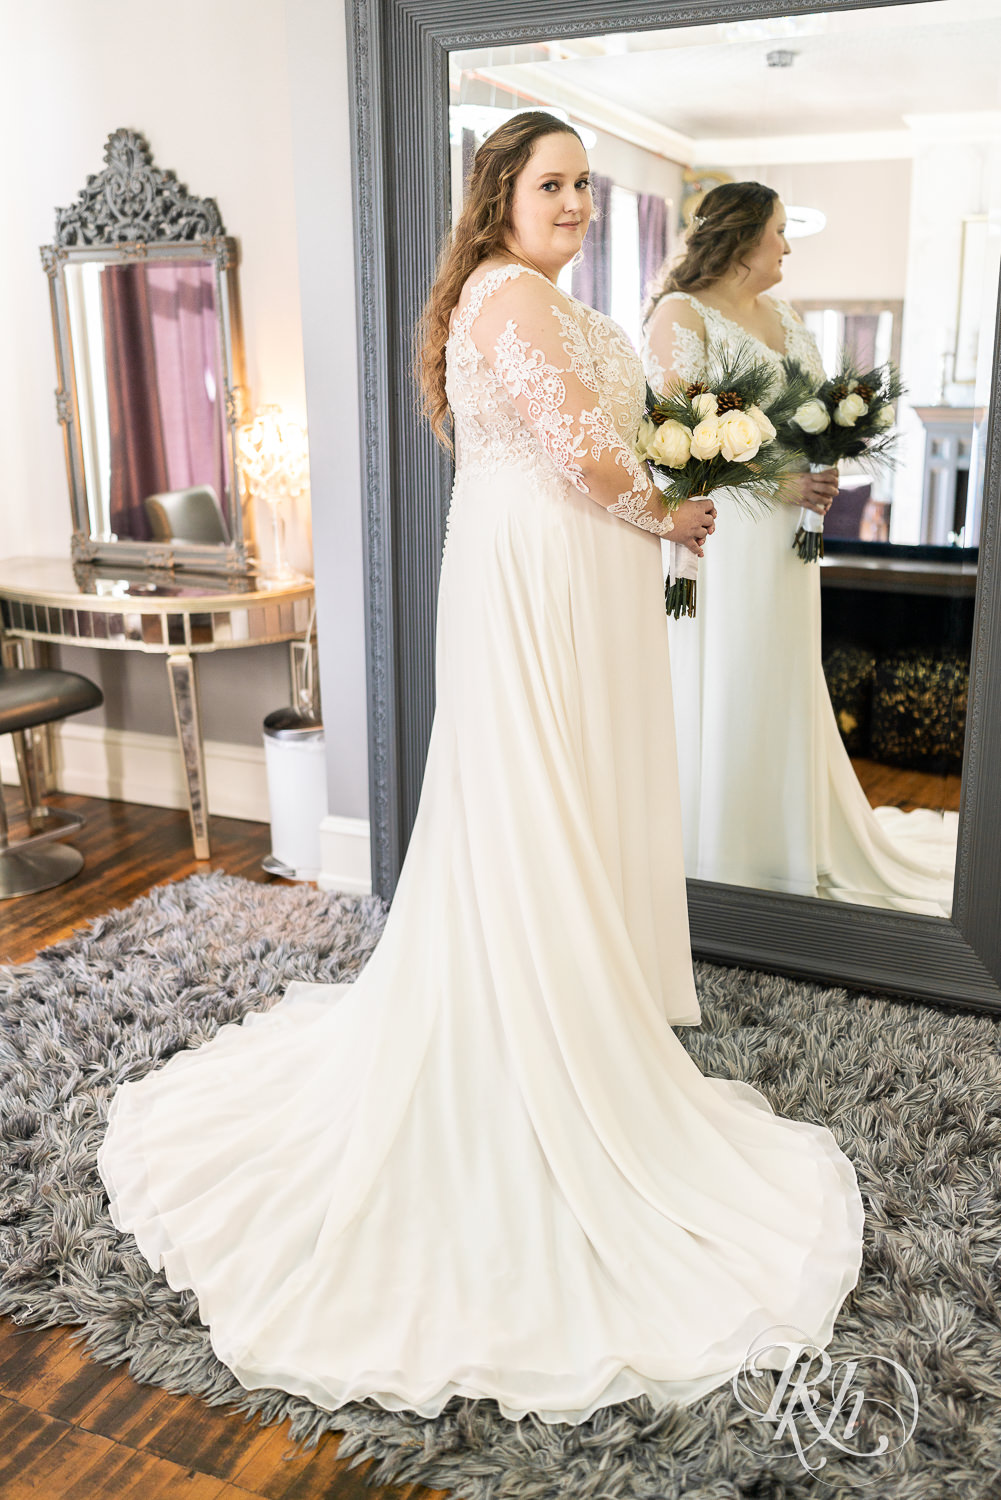 Bride standing in front of mirror holding flower at Semple Mansion in Minneapolis, Minnesota.